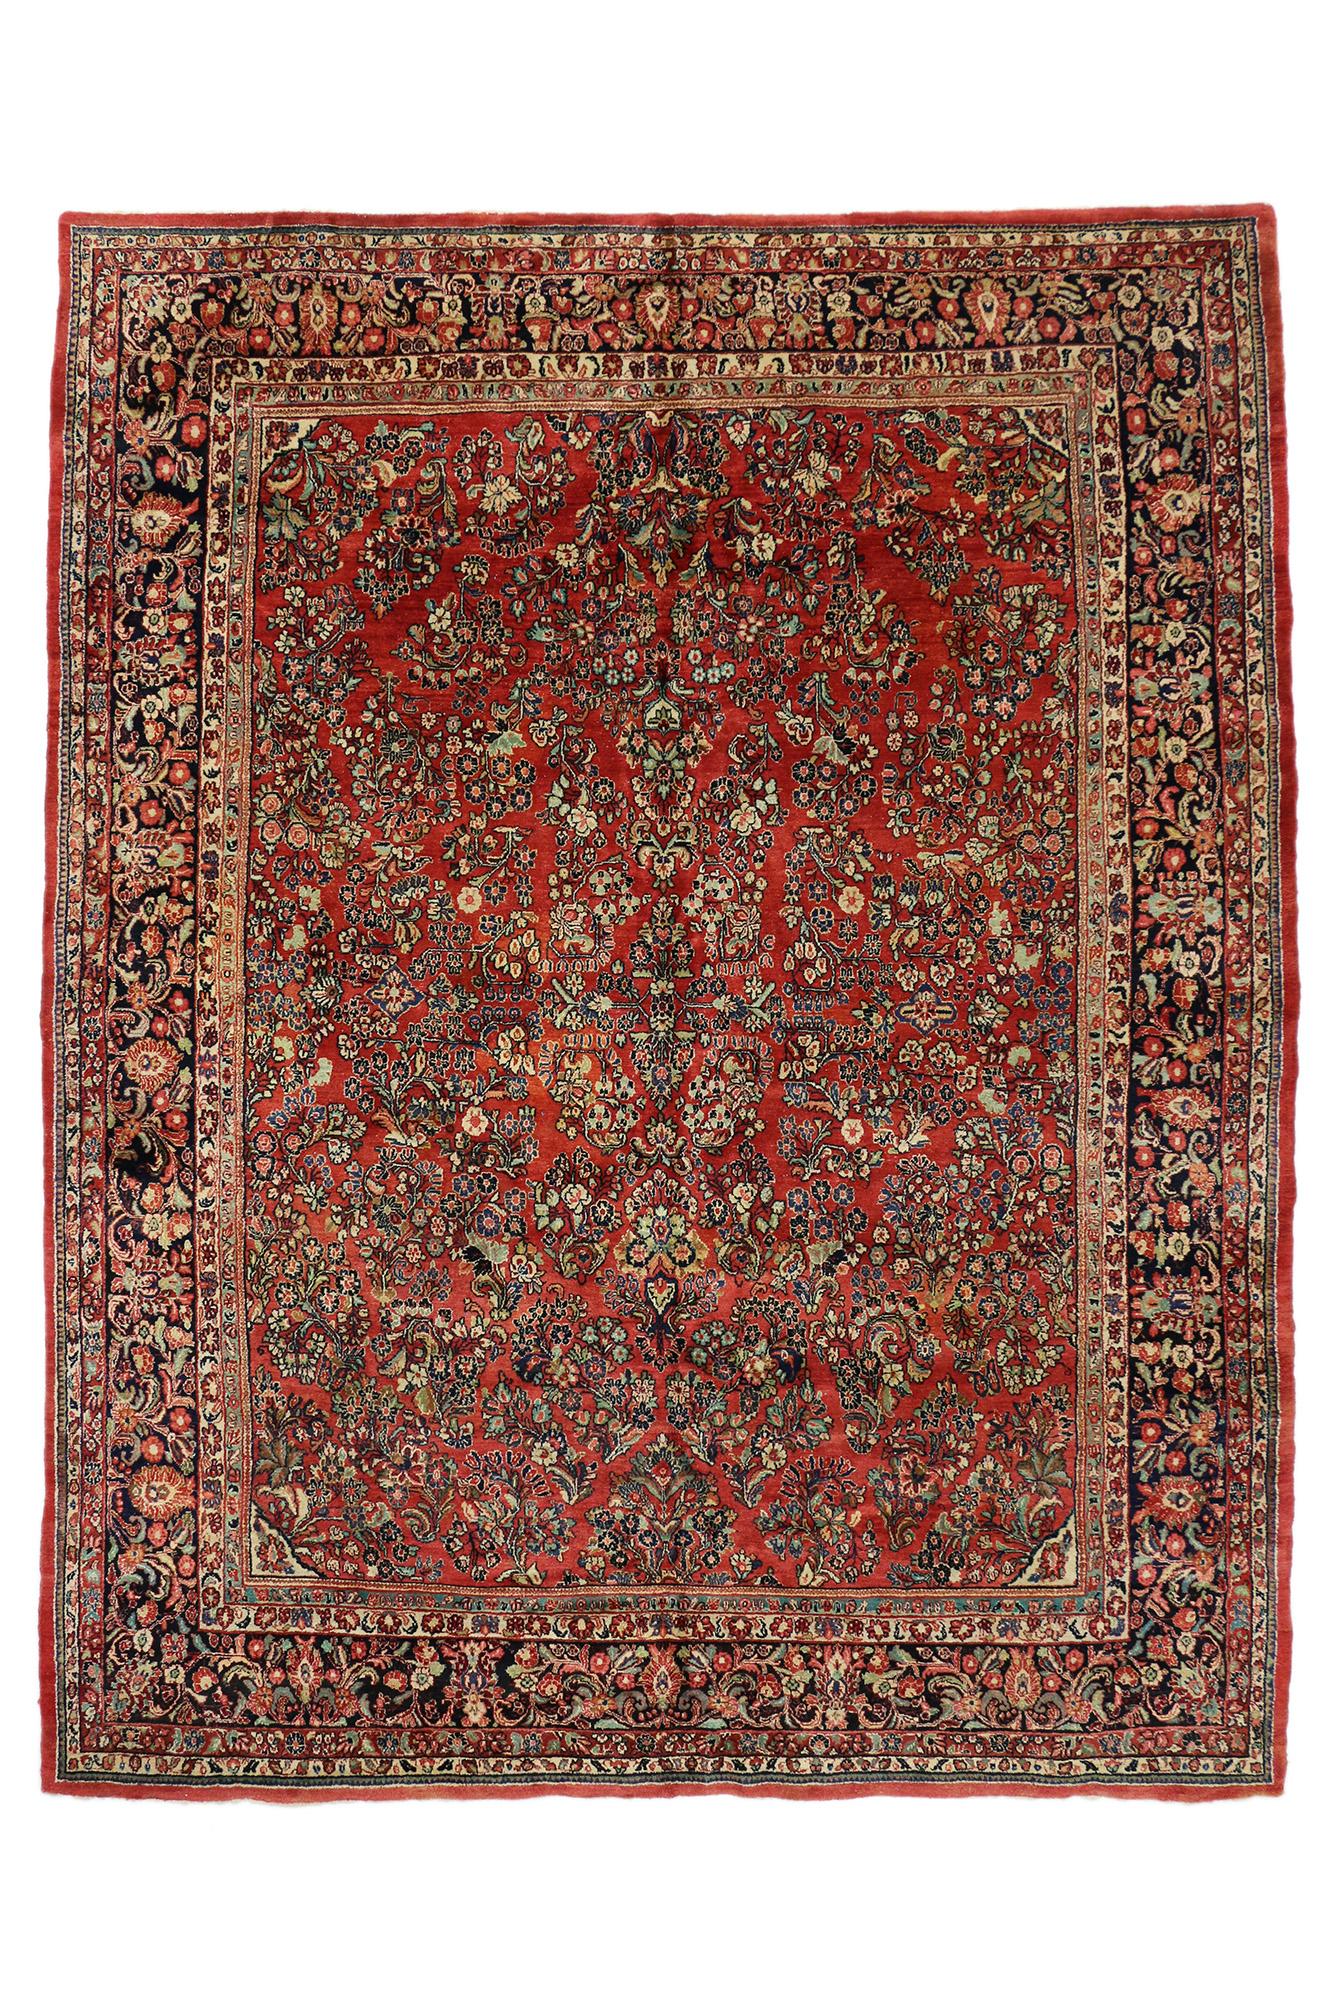 20th Century Antique Persian Sarouk Rug with Art Nouveau Style For Sale